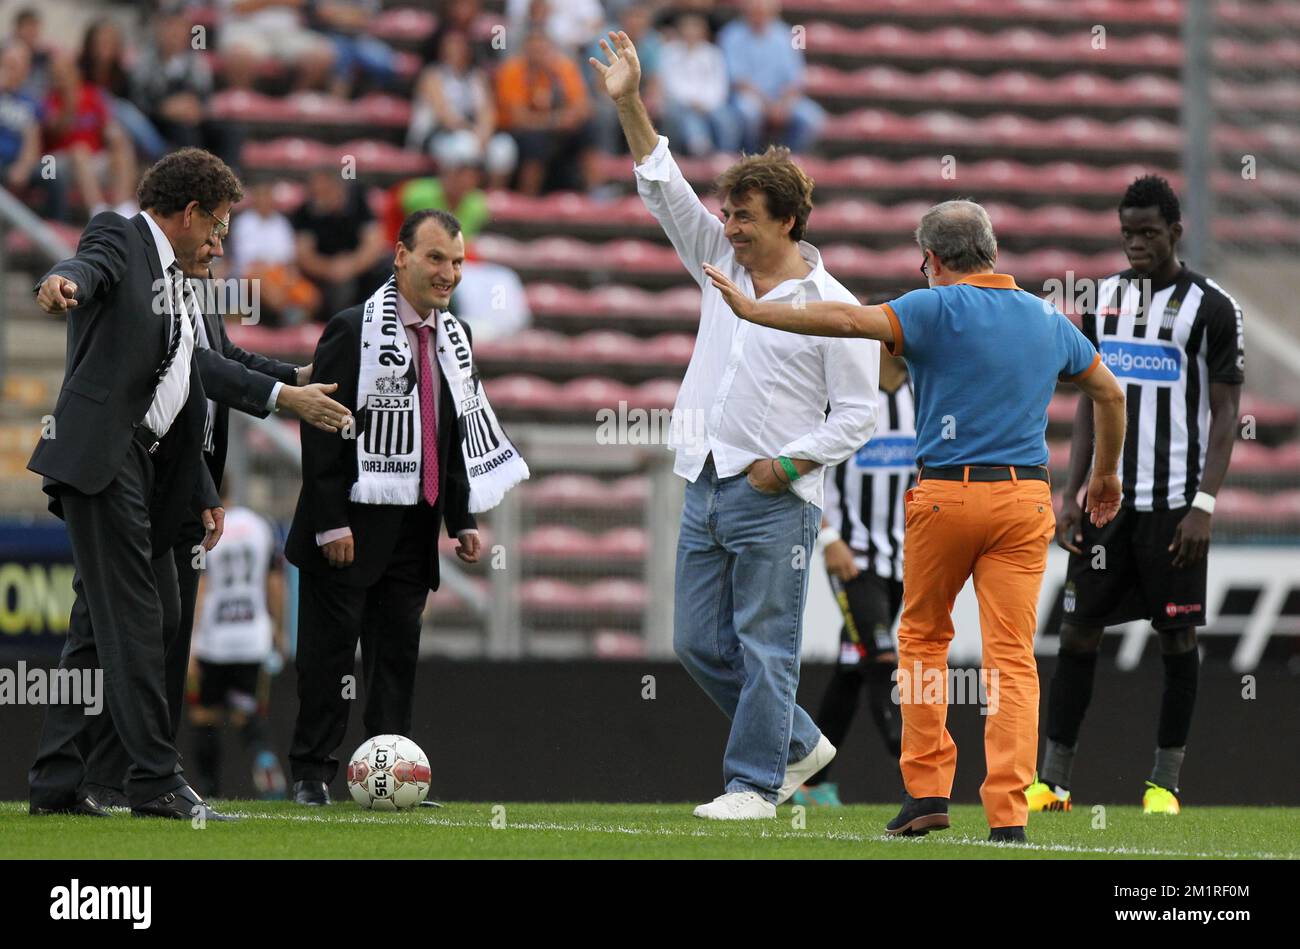 Singer Claude Barzotti pictured at the start of the Jupiler Pro League match between Charleroi and KV Kortrijk, in Charleroi, Saturday 17 August 2013, on day 04 of the Belgian soccer championship.  Stock Photo